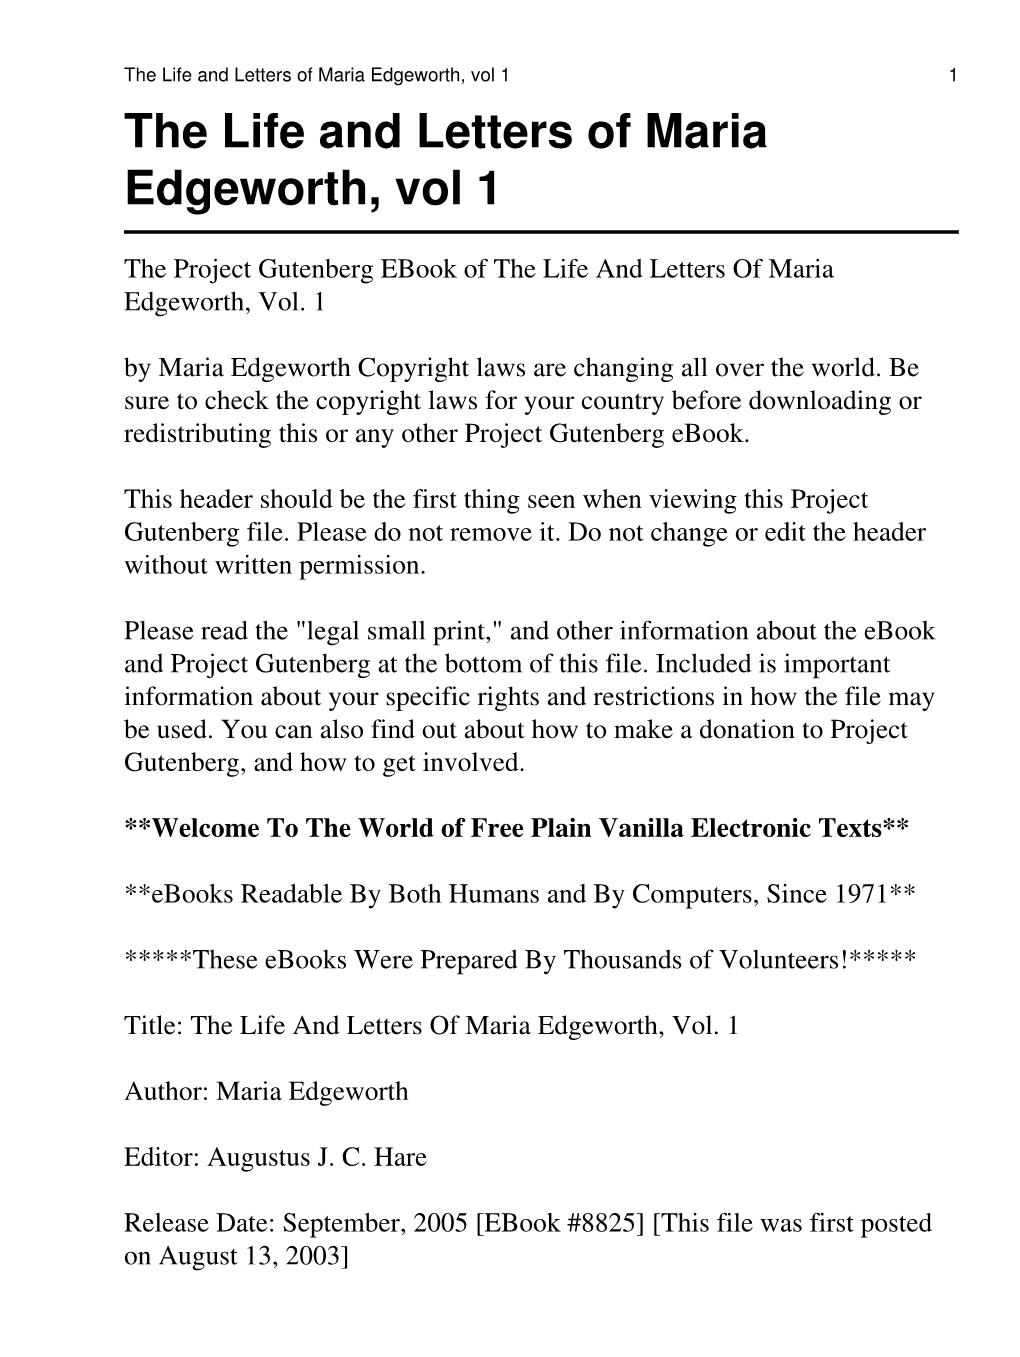 The Life and Letters of Maria Edgeworth, Vol 1 1 the Life and Letters of Maria Edgeworth, Vol 1